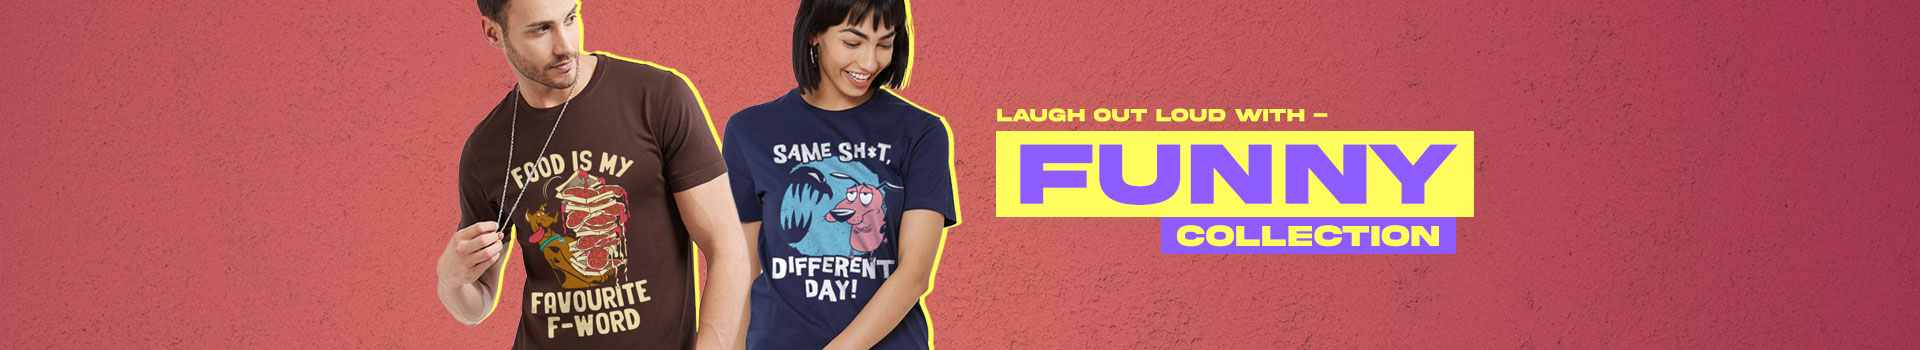 Funny Merchandise Page